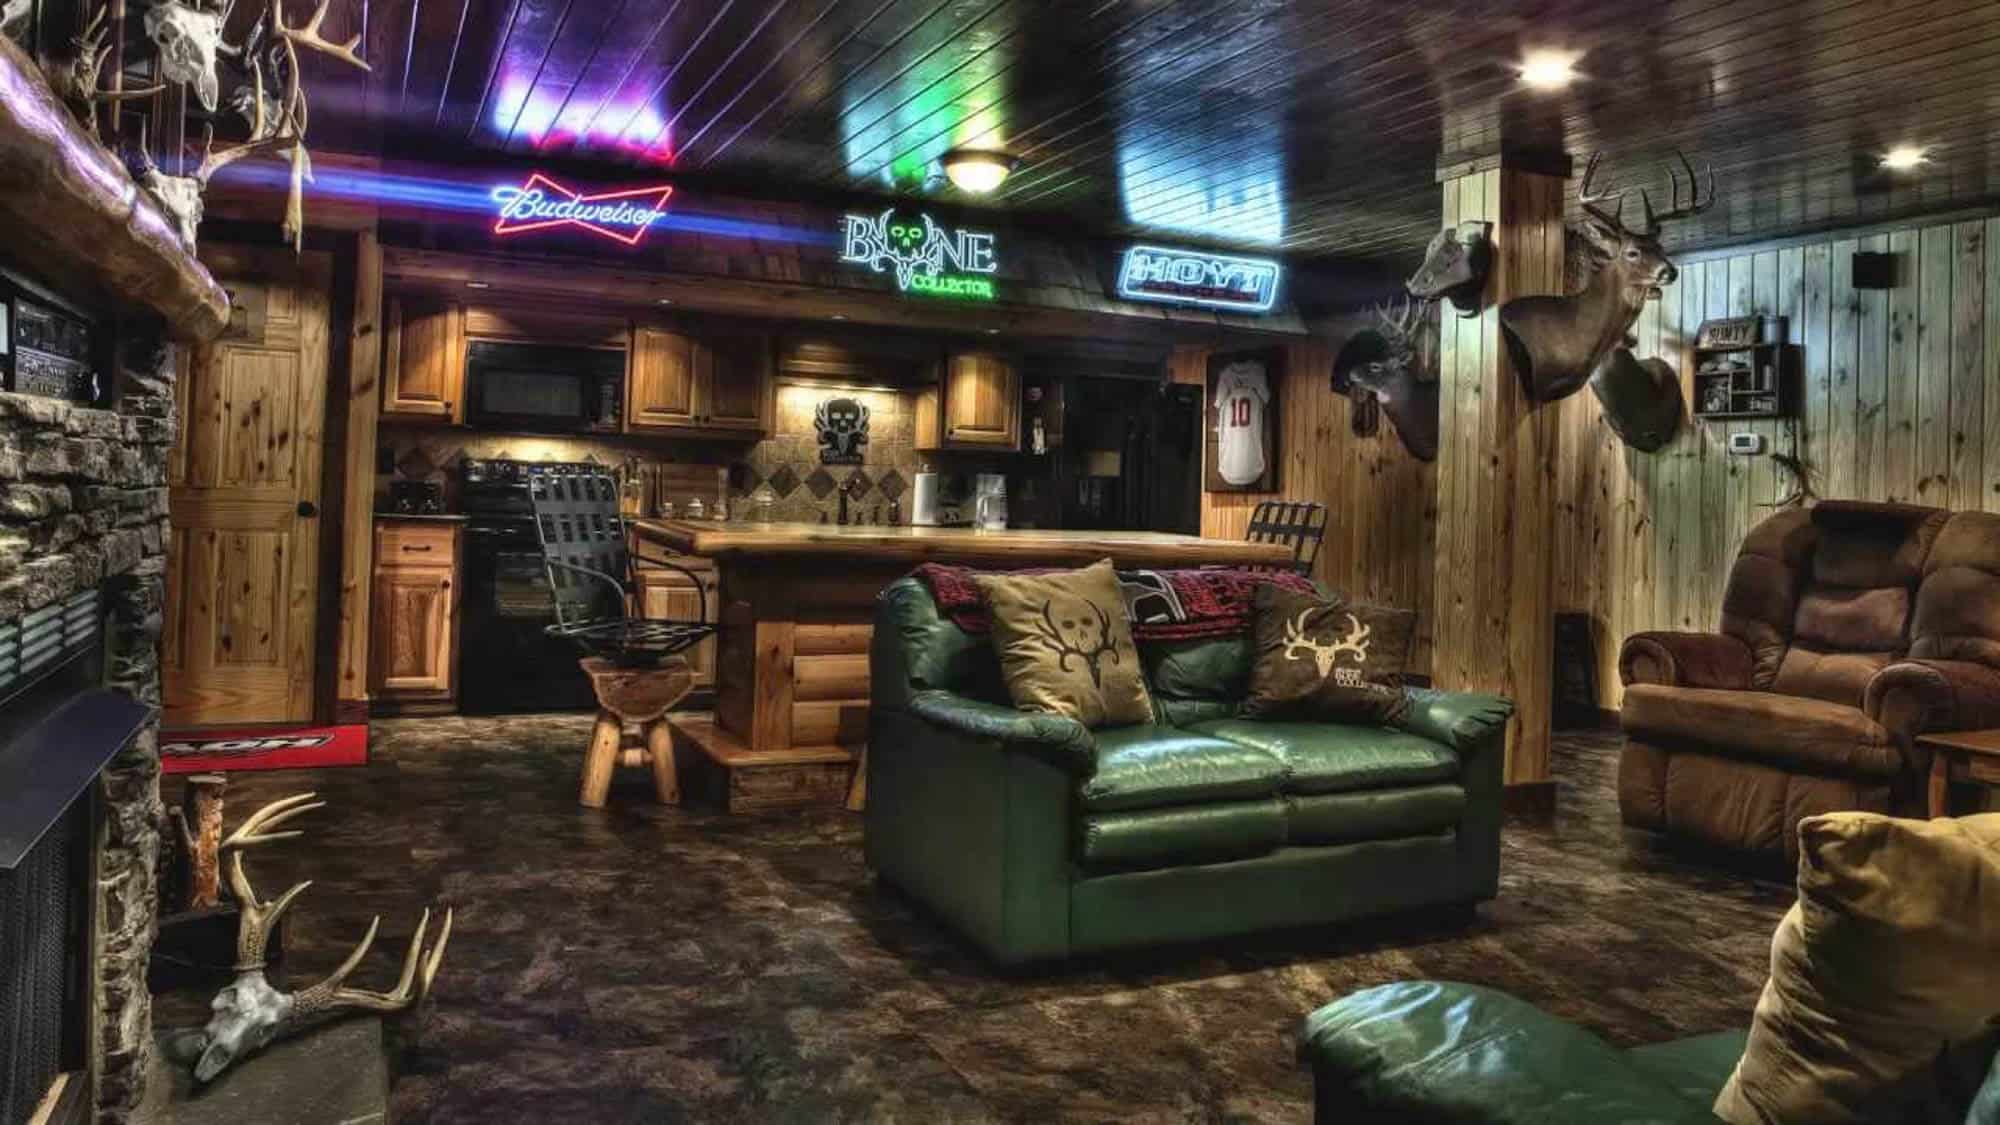 The Man Cave Decor Guide